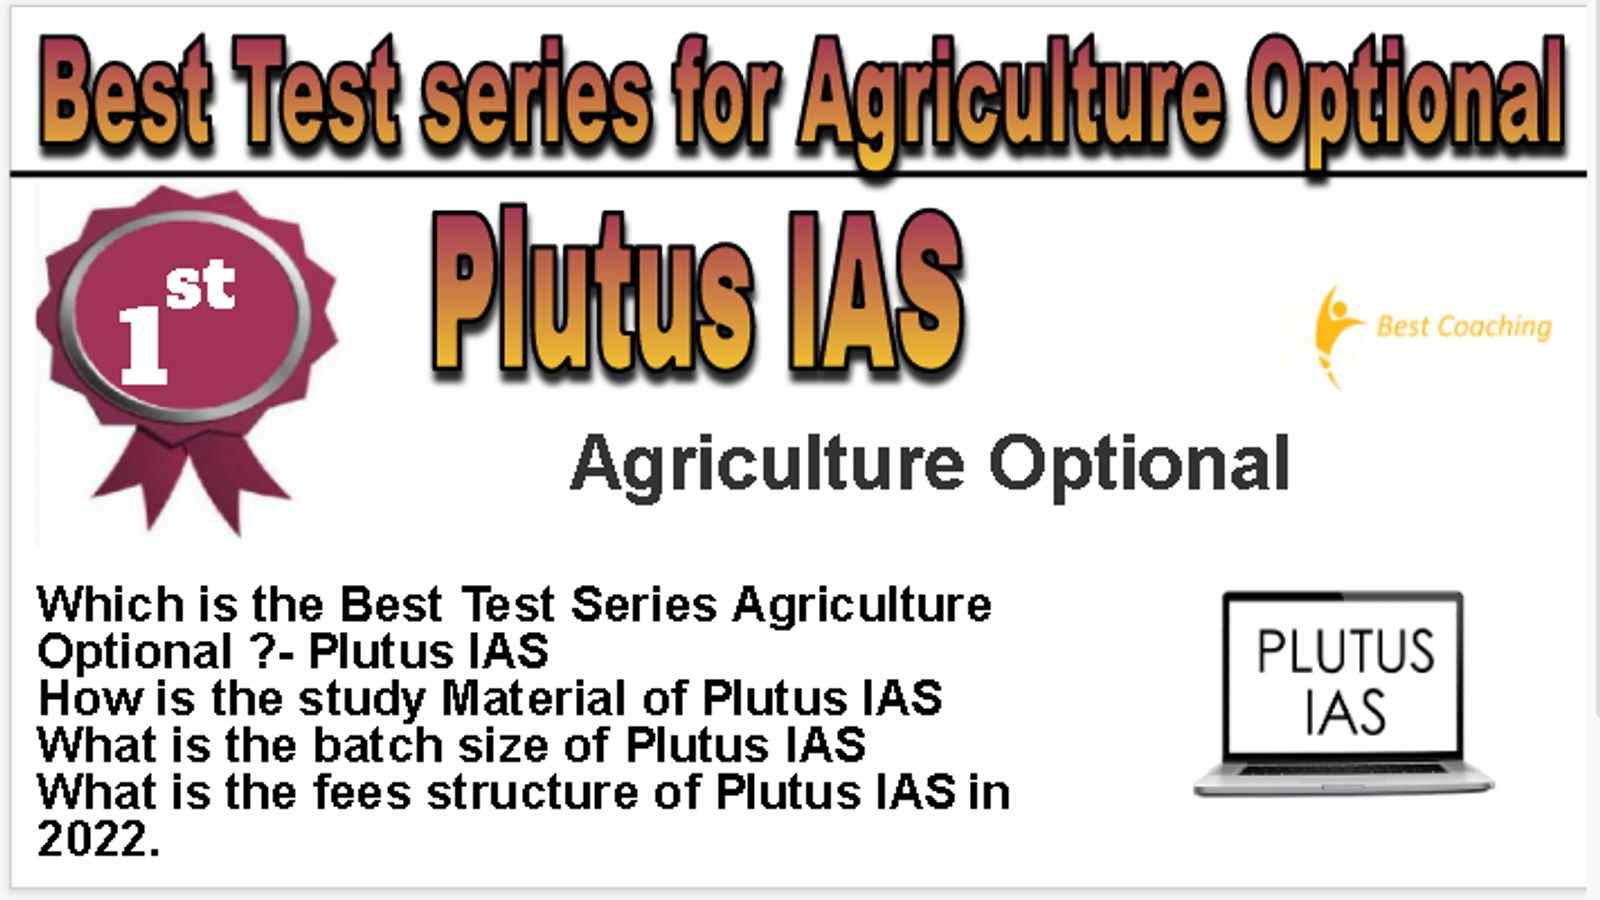 Rank 1 Best Test series for Agriculture Optional